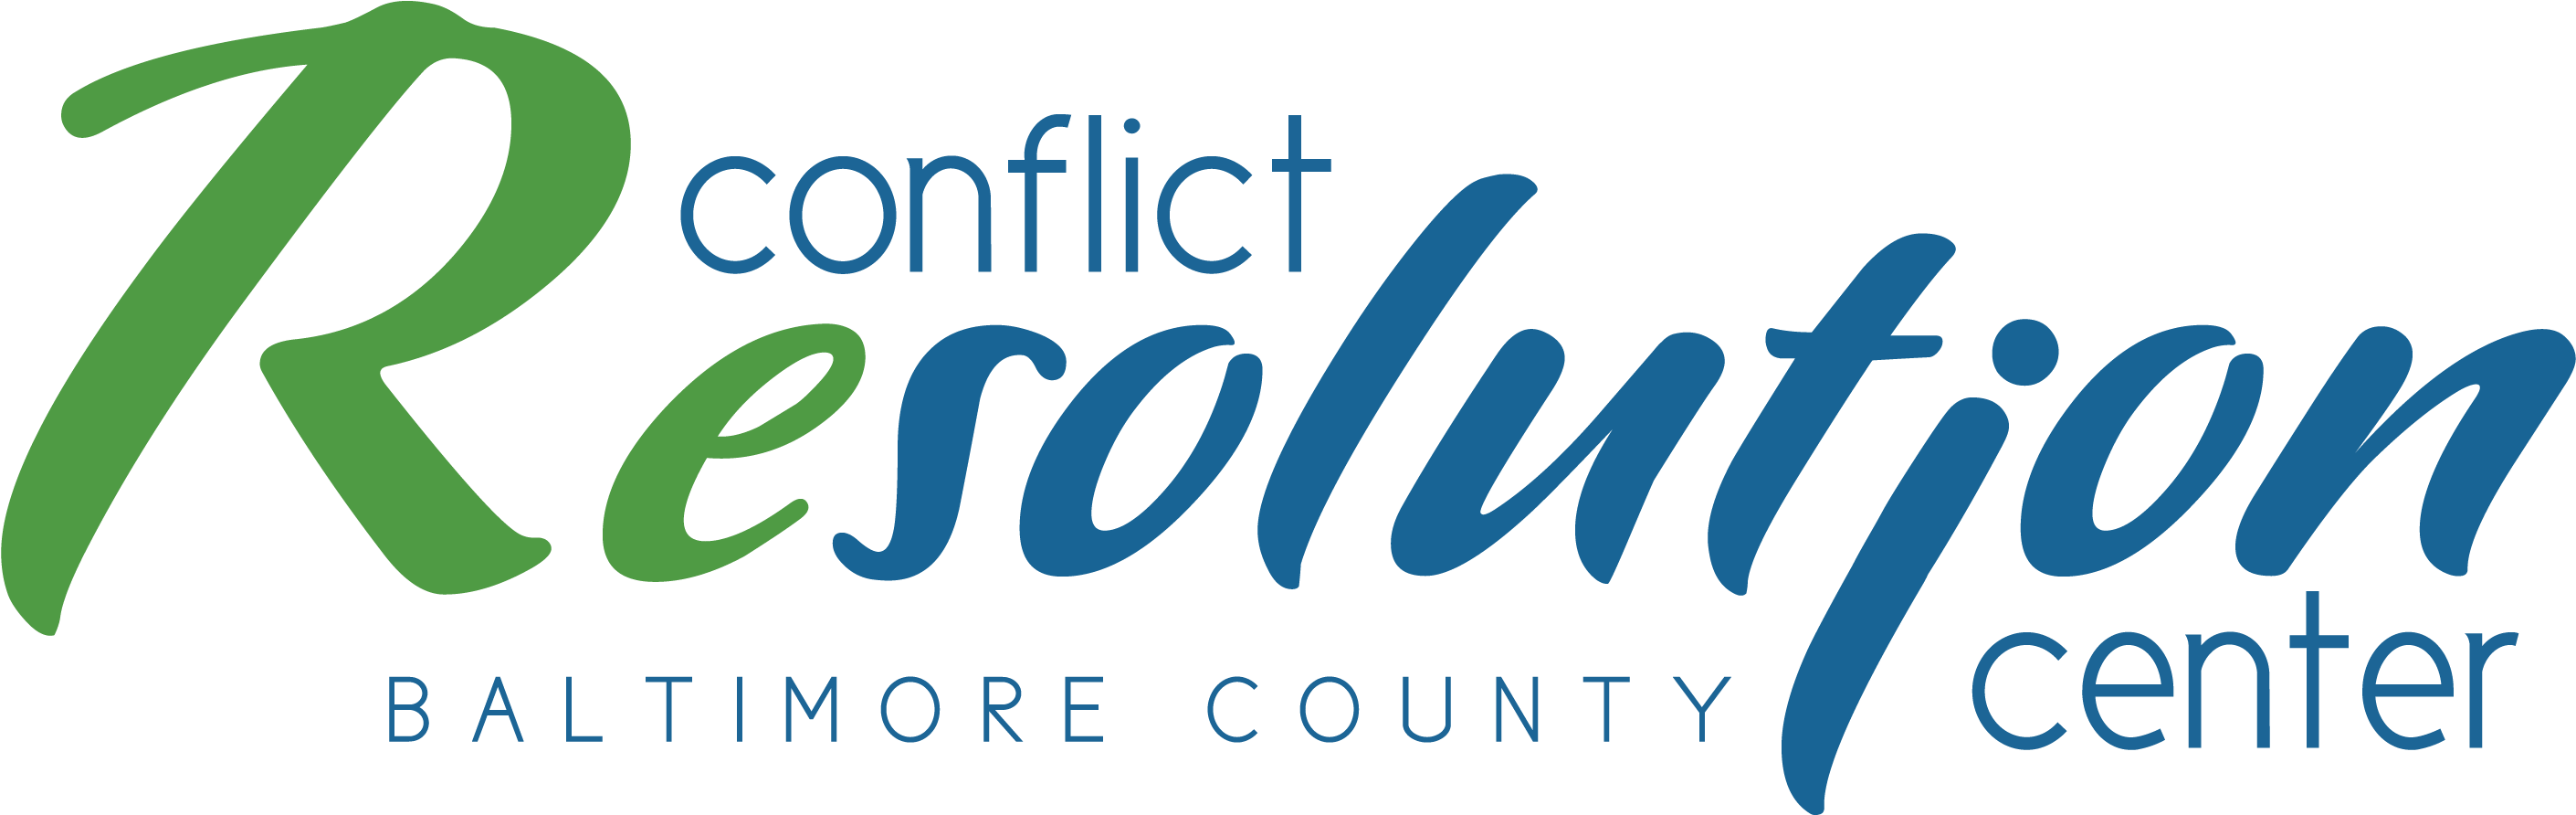 Conflict Resolution Center Of Baltimore County - Baltimore County, Maryland (3000x1017), Png Download